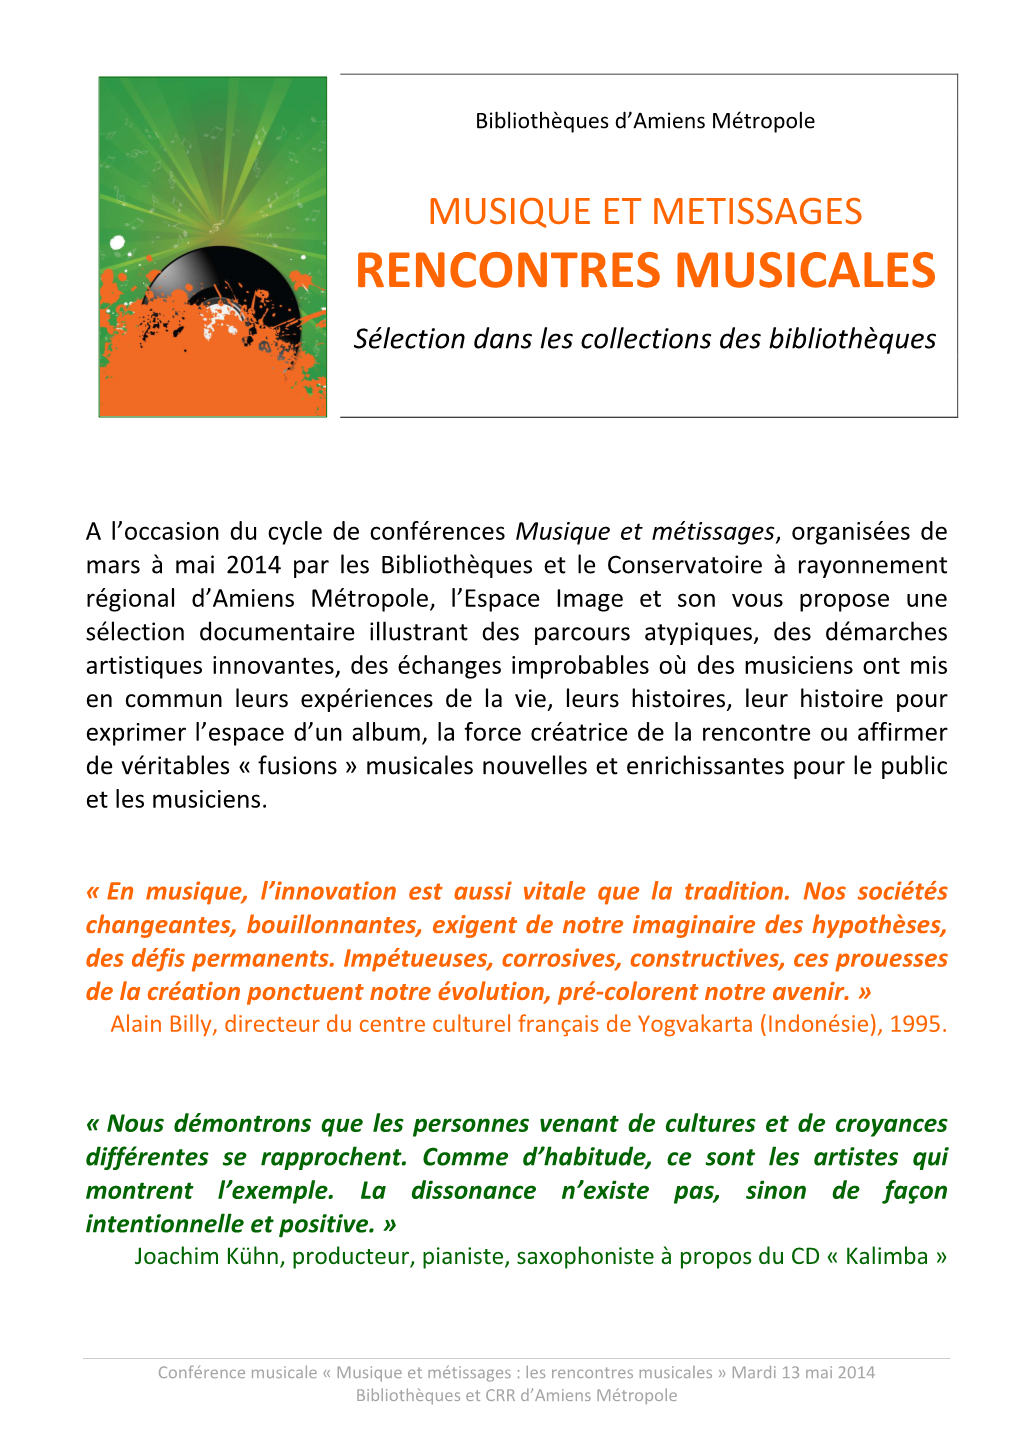 Rencontres Musicales